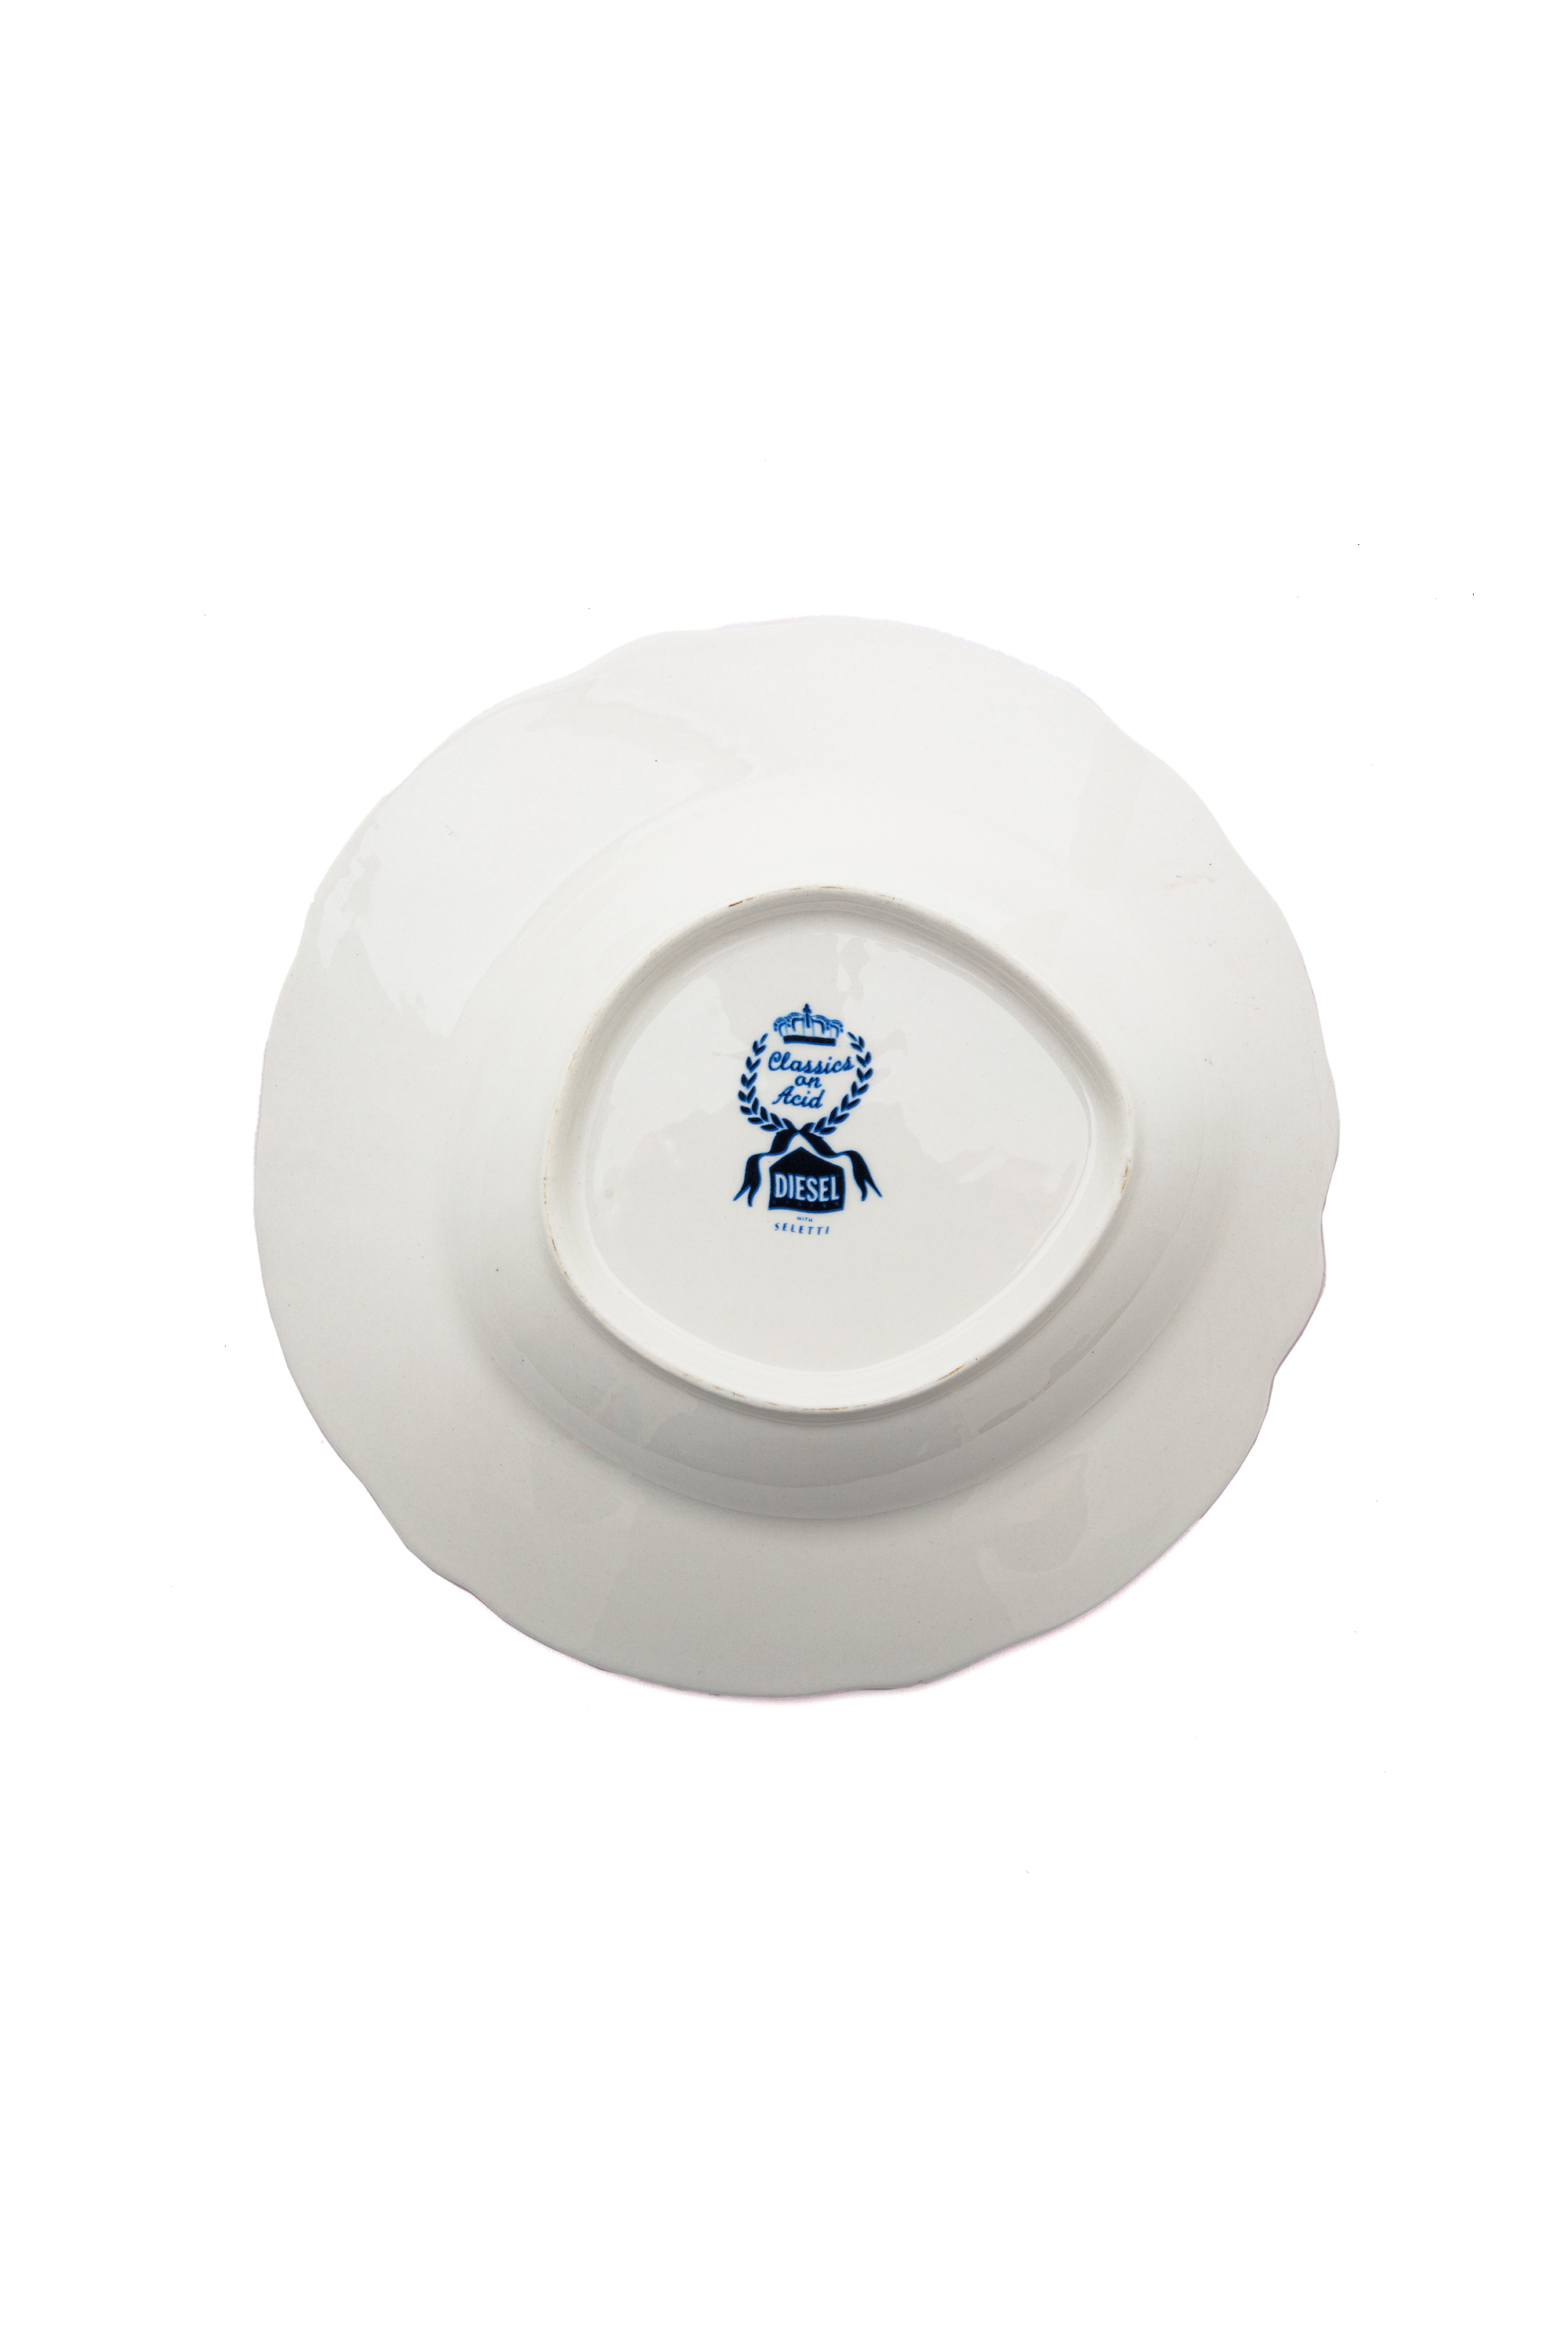 Diesel - 11220 SOUP PLATE IN PORCELAIN "CLASSIC O, Bianco/Blu - Image 2